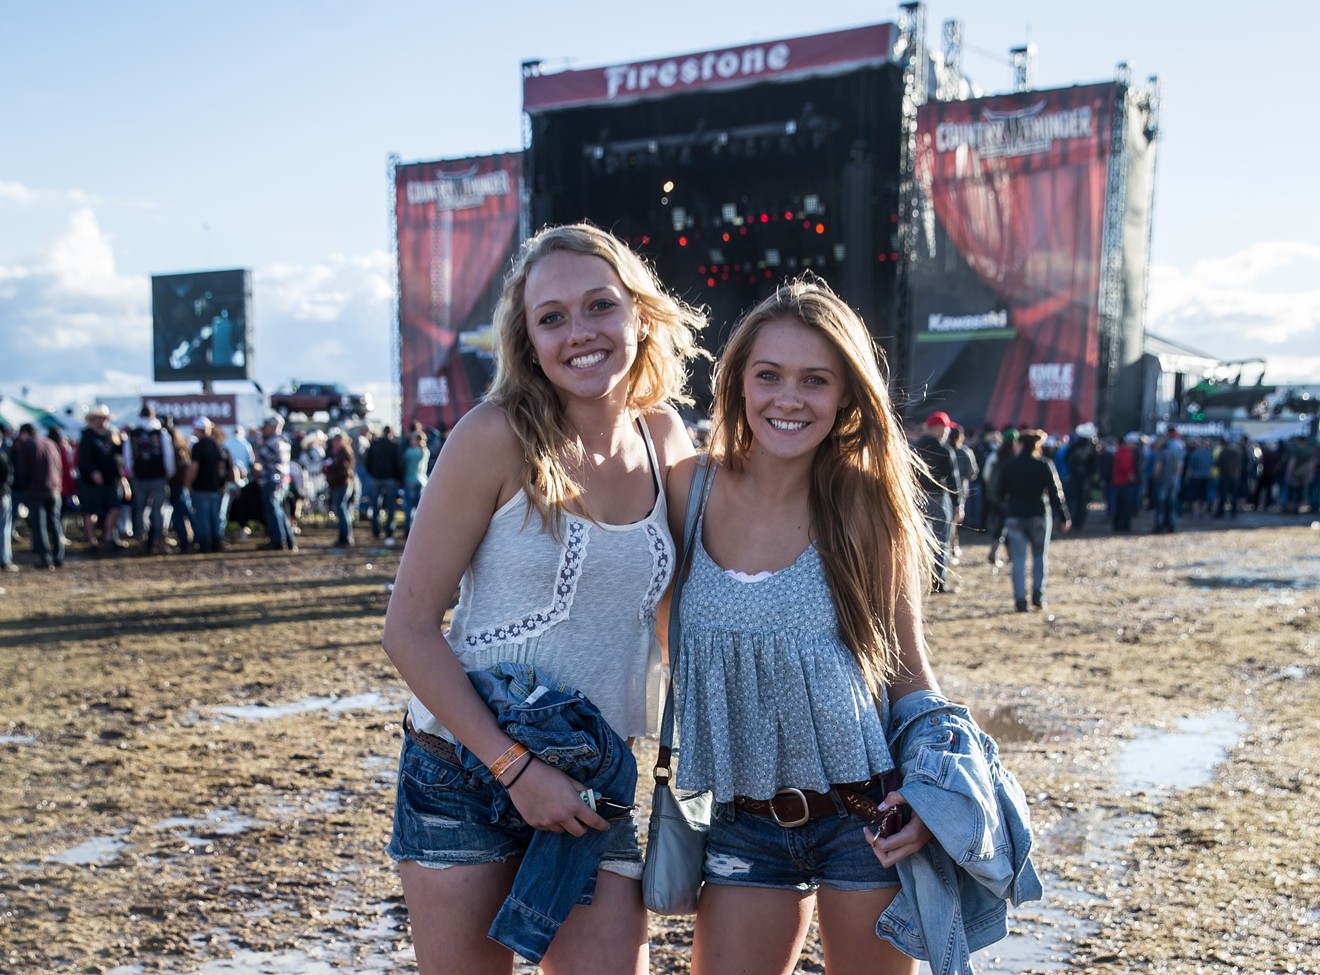 Country Thunder attendees at the festival in 2016.